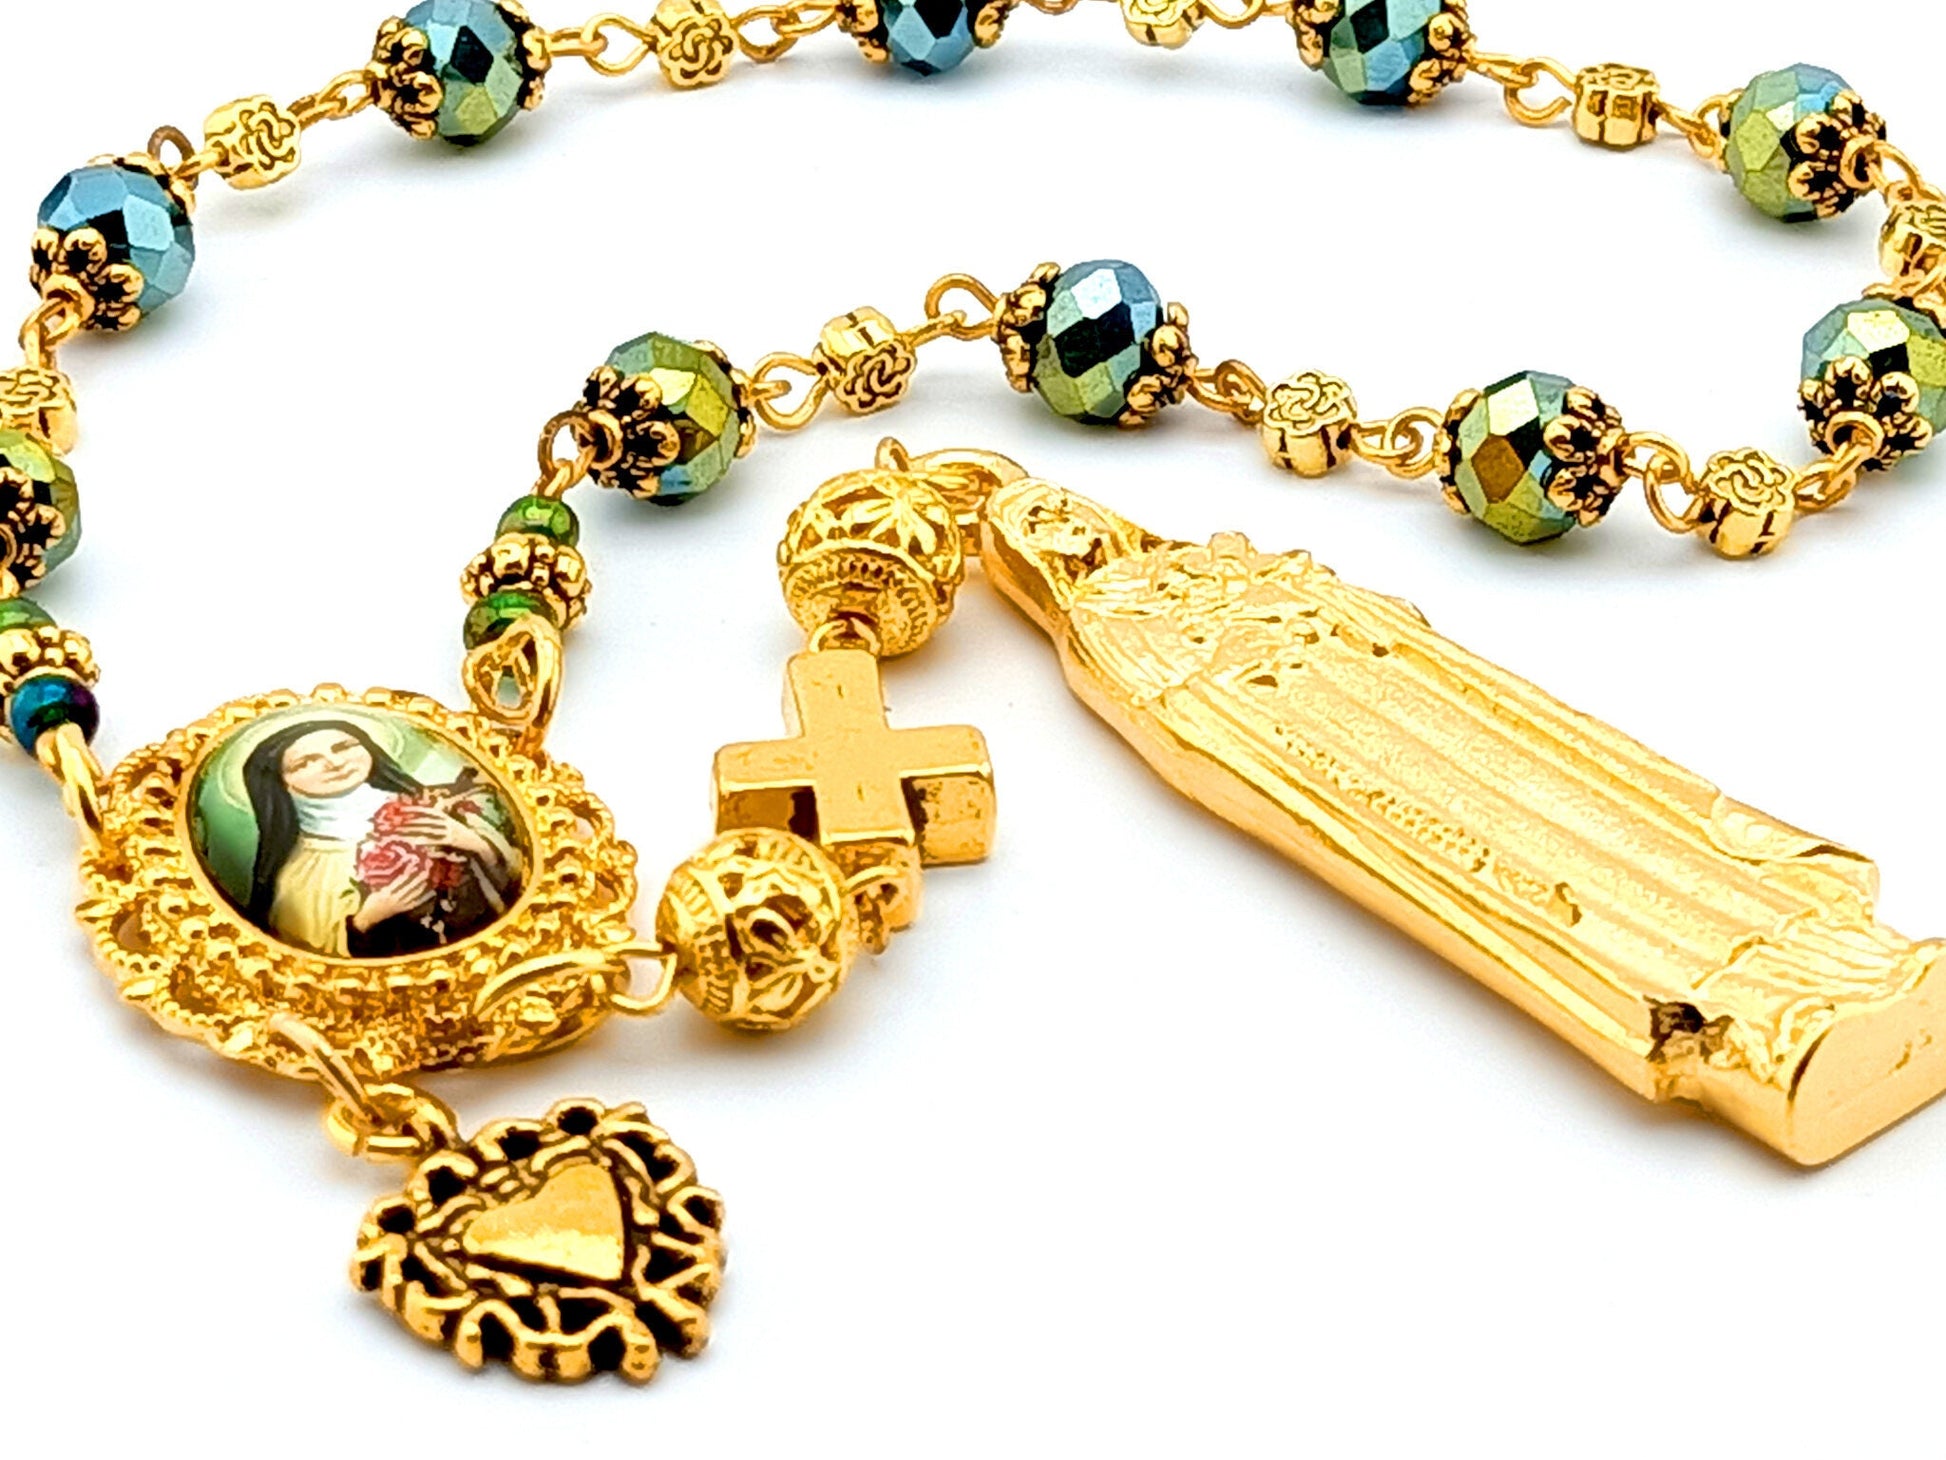 Saint Therese of Lisieux unique rosary beads single decade rosary with faceted green glass beads, golden statue medal, picture centre medal and pater bead.